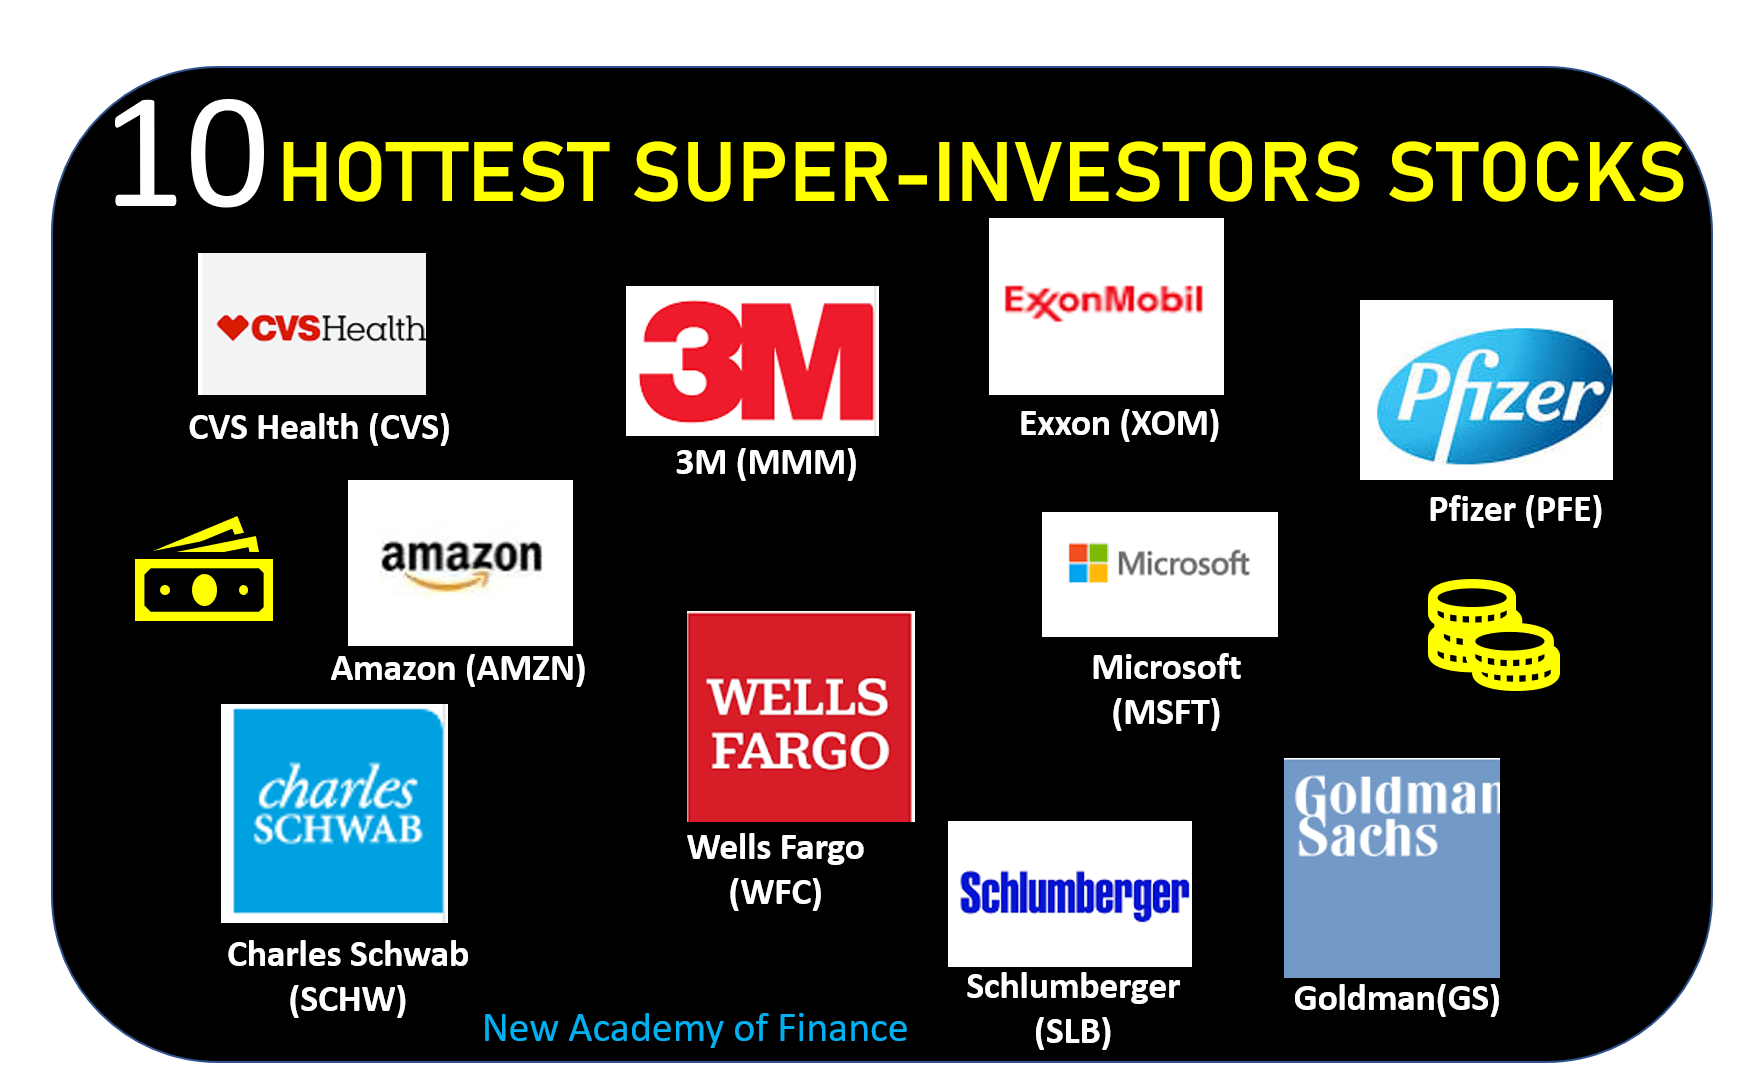 Top 10 hottest stocks that superinvestors are buying New Academy of